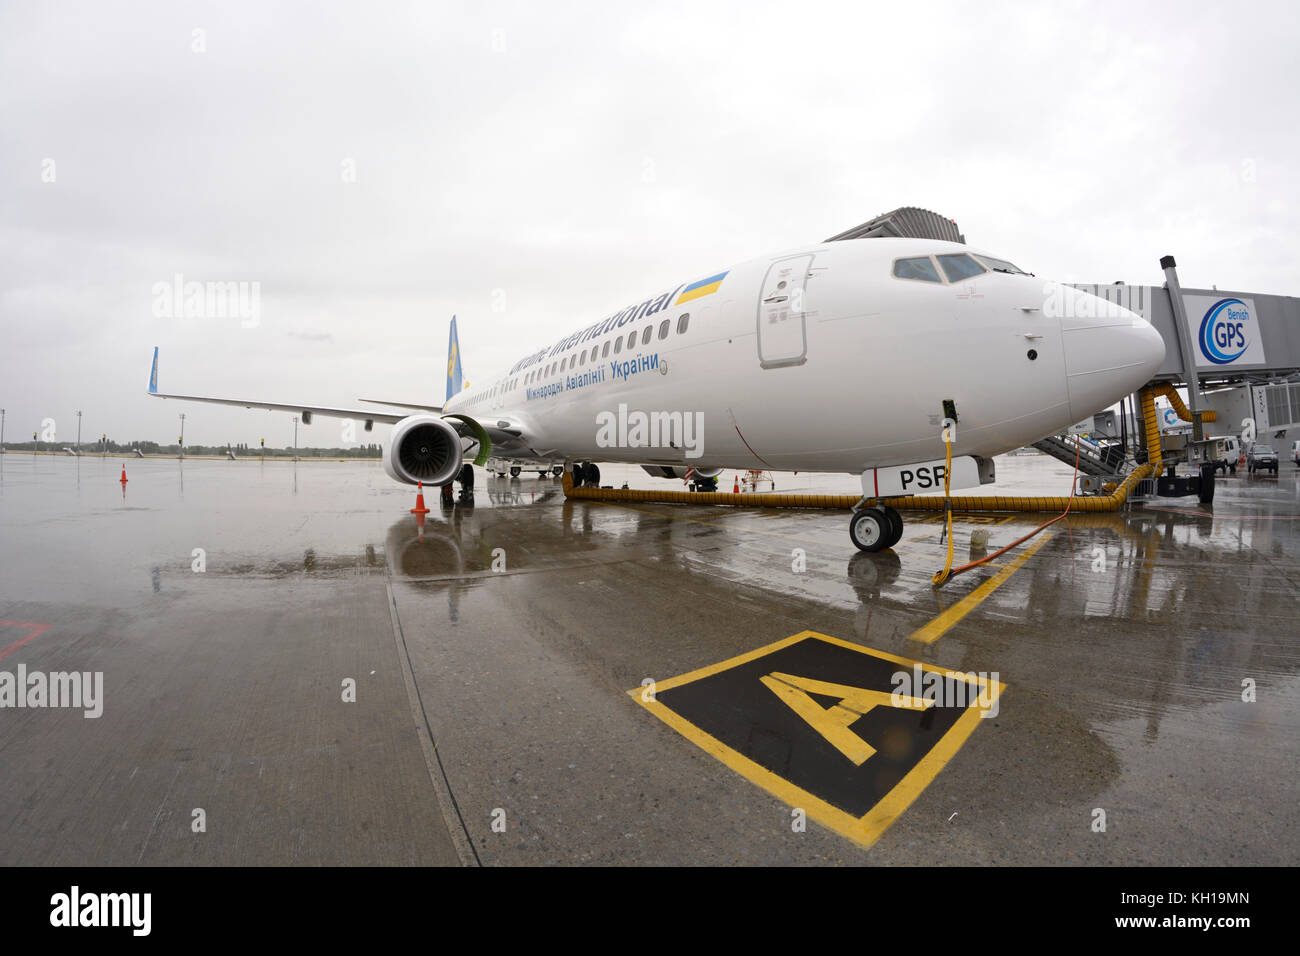 Aircraft Boeing 737-400 standing on aircraft parking space, ready for technical inspection. Stock Photo